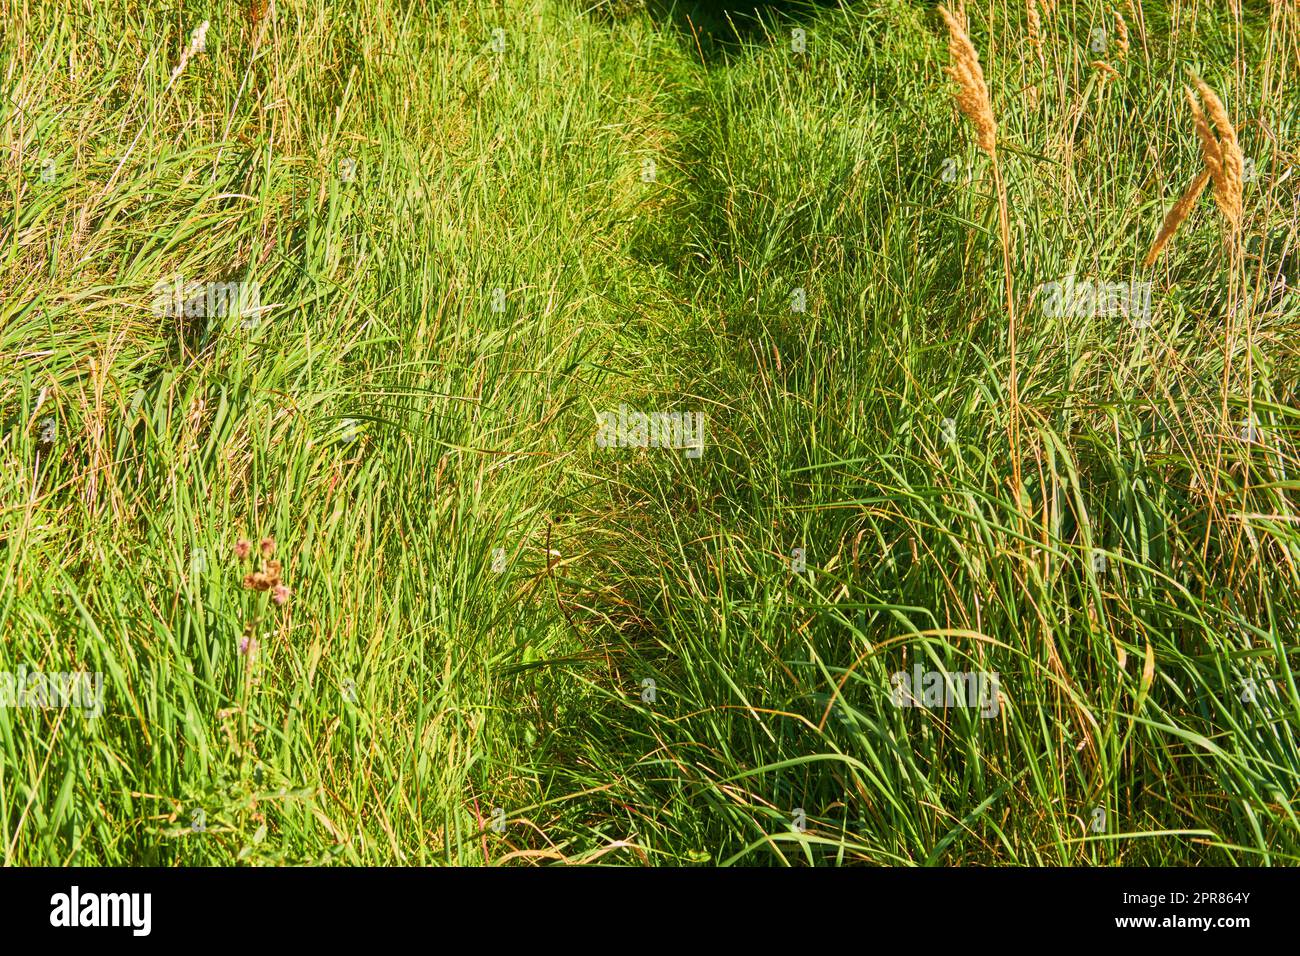 Overgrown walking path in a grass field outside in the sunshine. Empty rural environment of quiet nature scene of wild reeds in a lush green meadow for a copy space background. Stock Photo